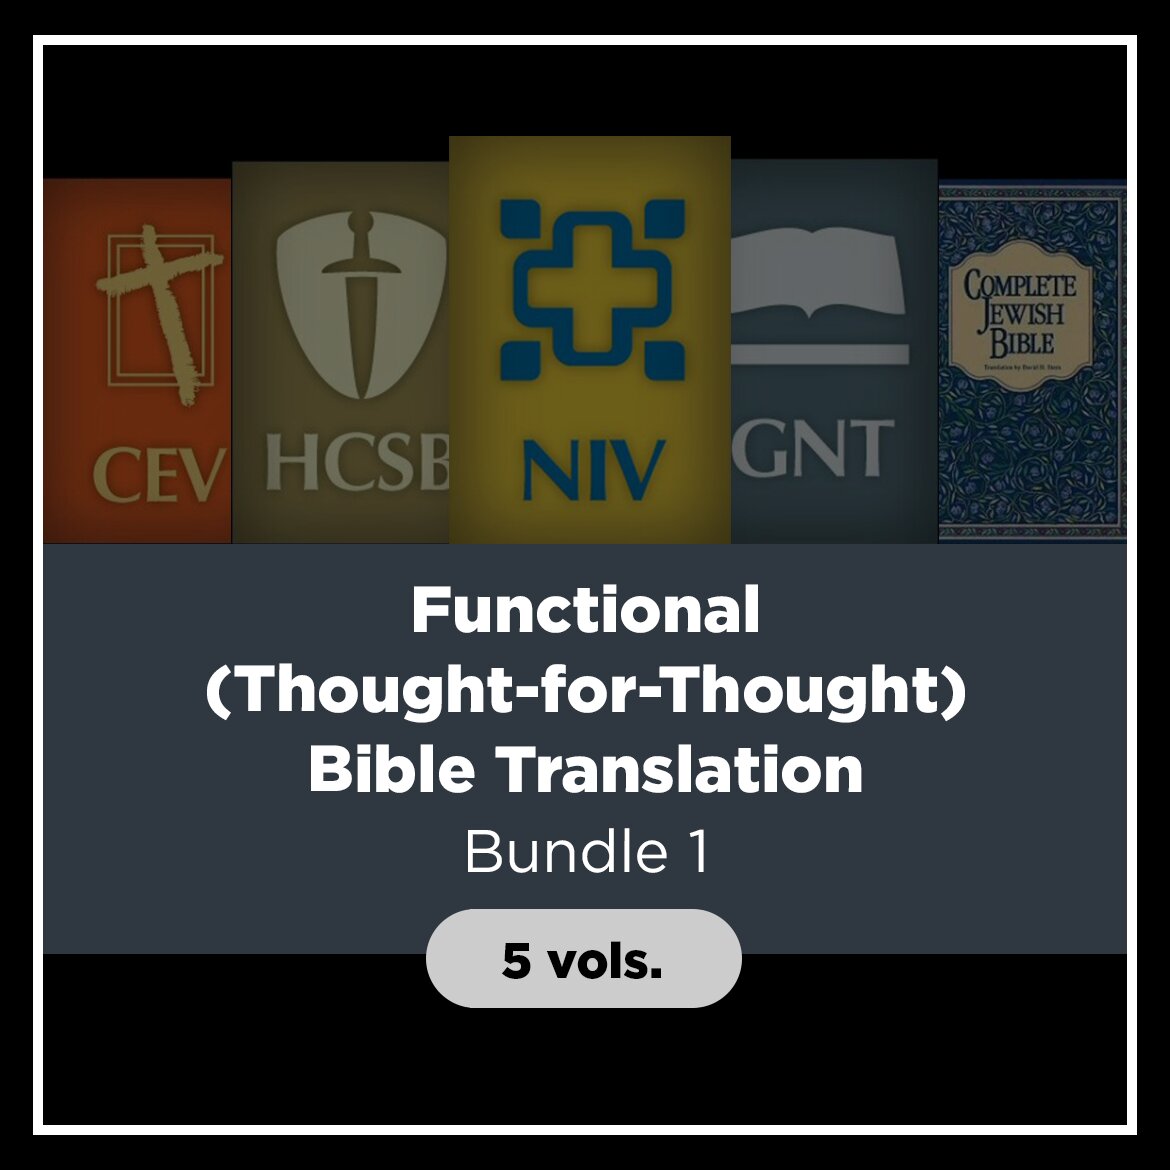 Functional (Thought-for-Thought) Bible Translation Bundle 1, 5 vols.